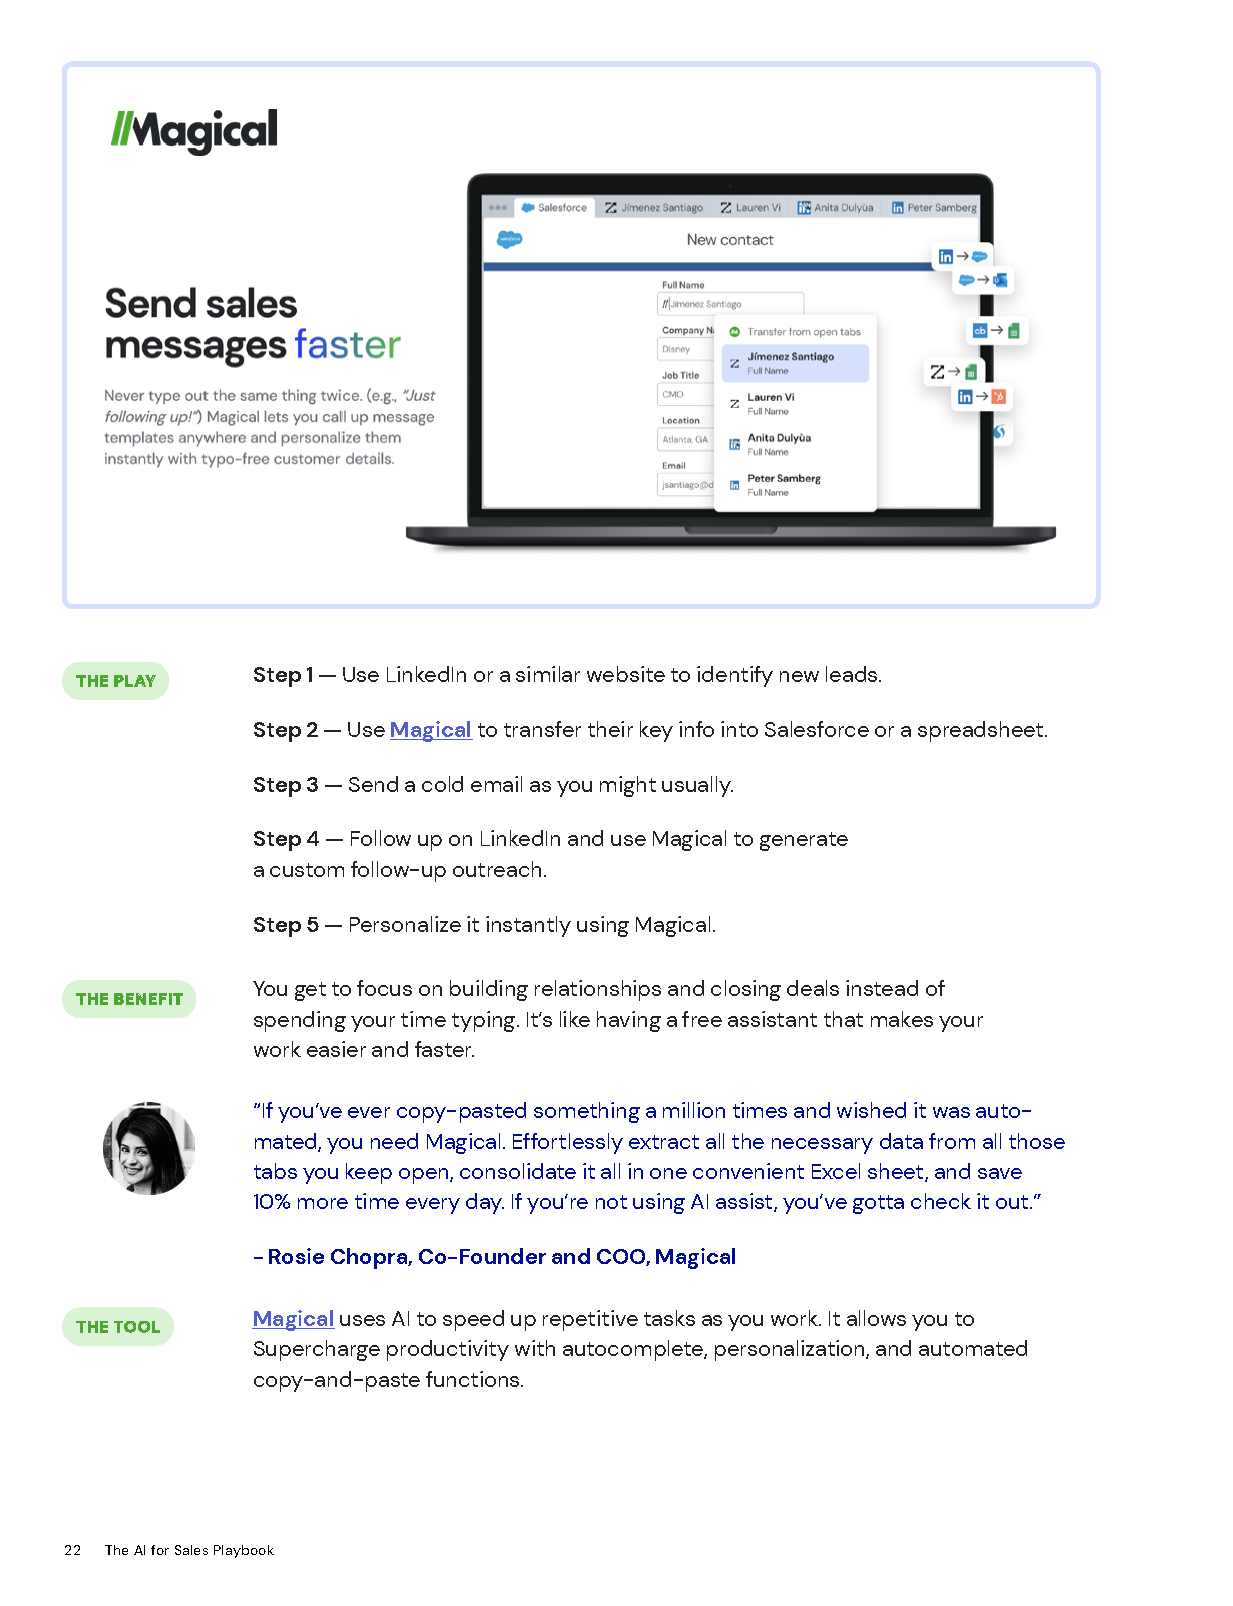 AI for Sales Playbook - magical_Page_22.png